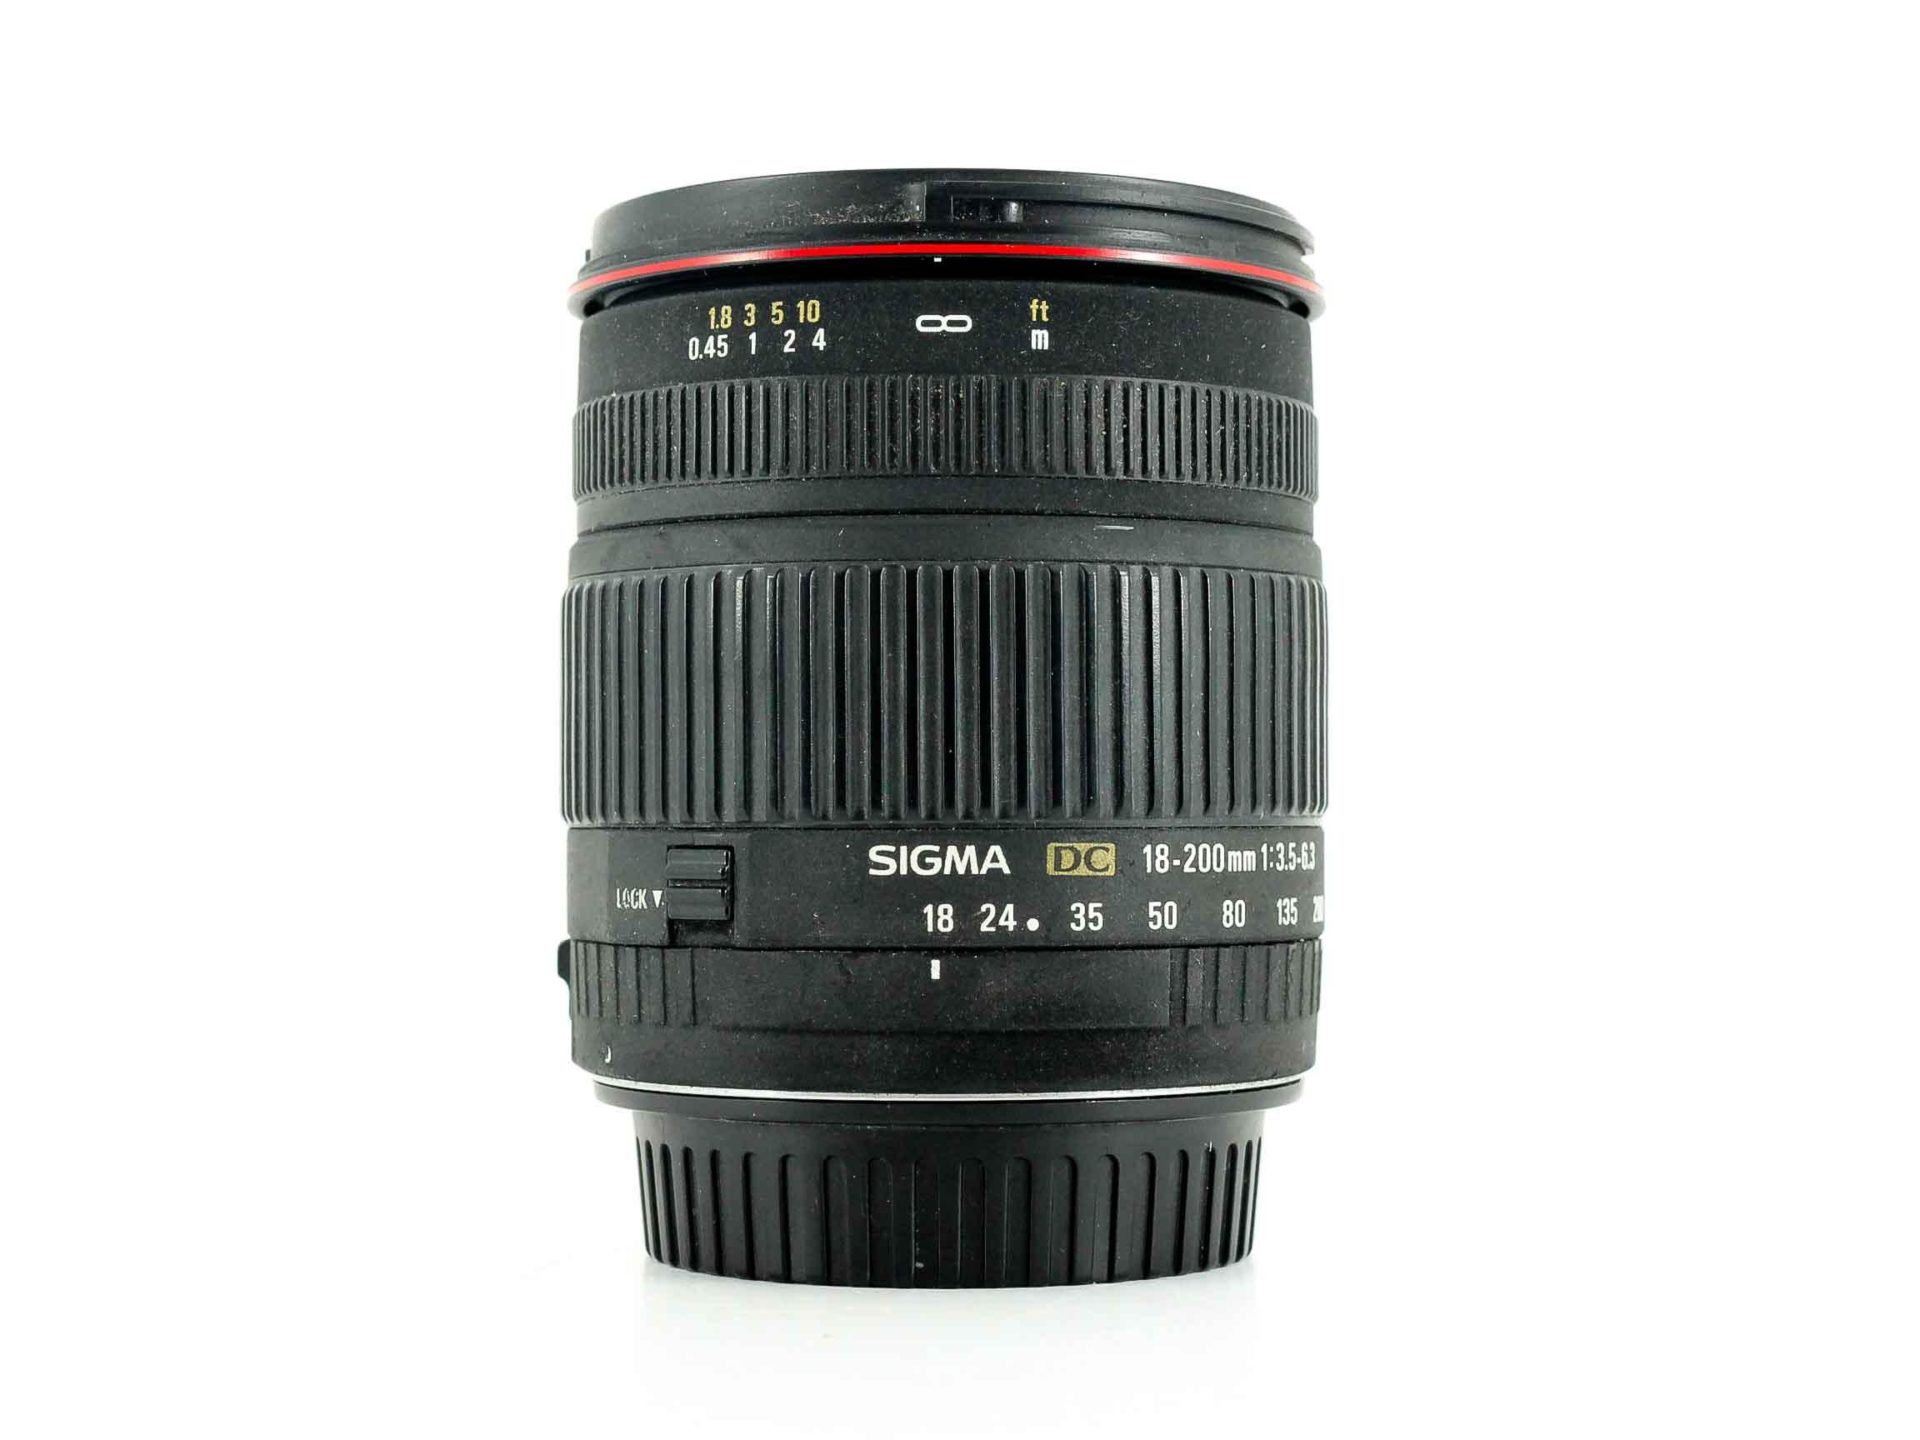 Sigma 18-200mm f/3.5-6.3 DC Canon EF-S Lens - Lenses and Cameras